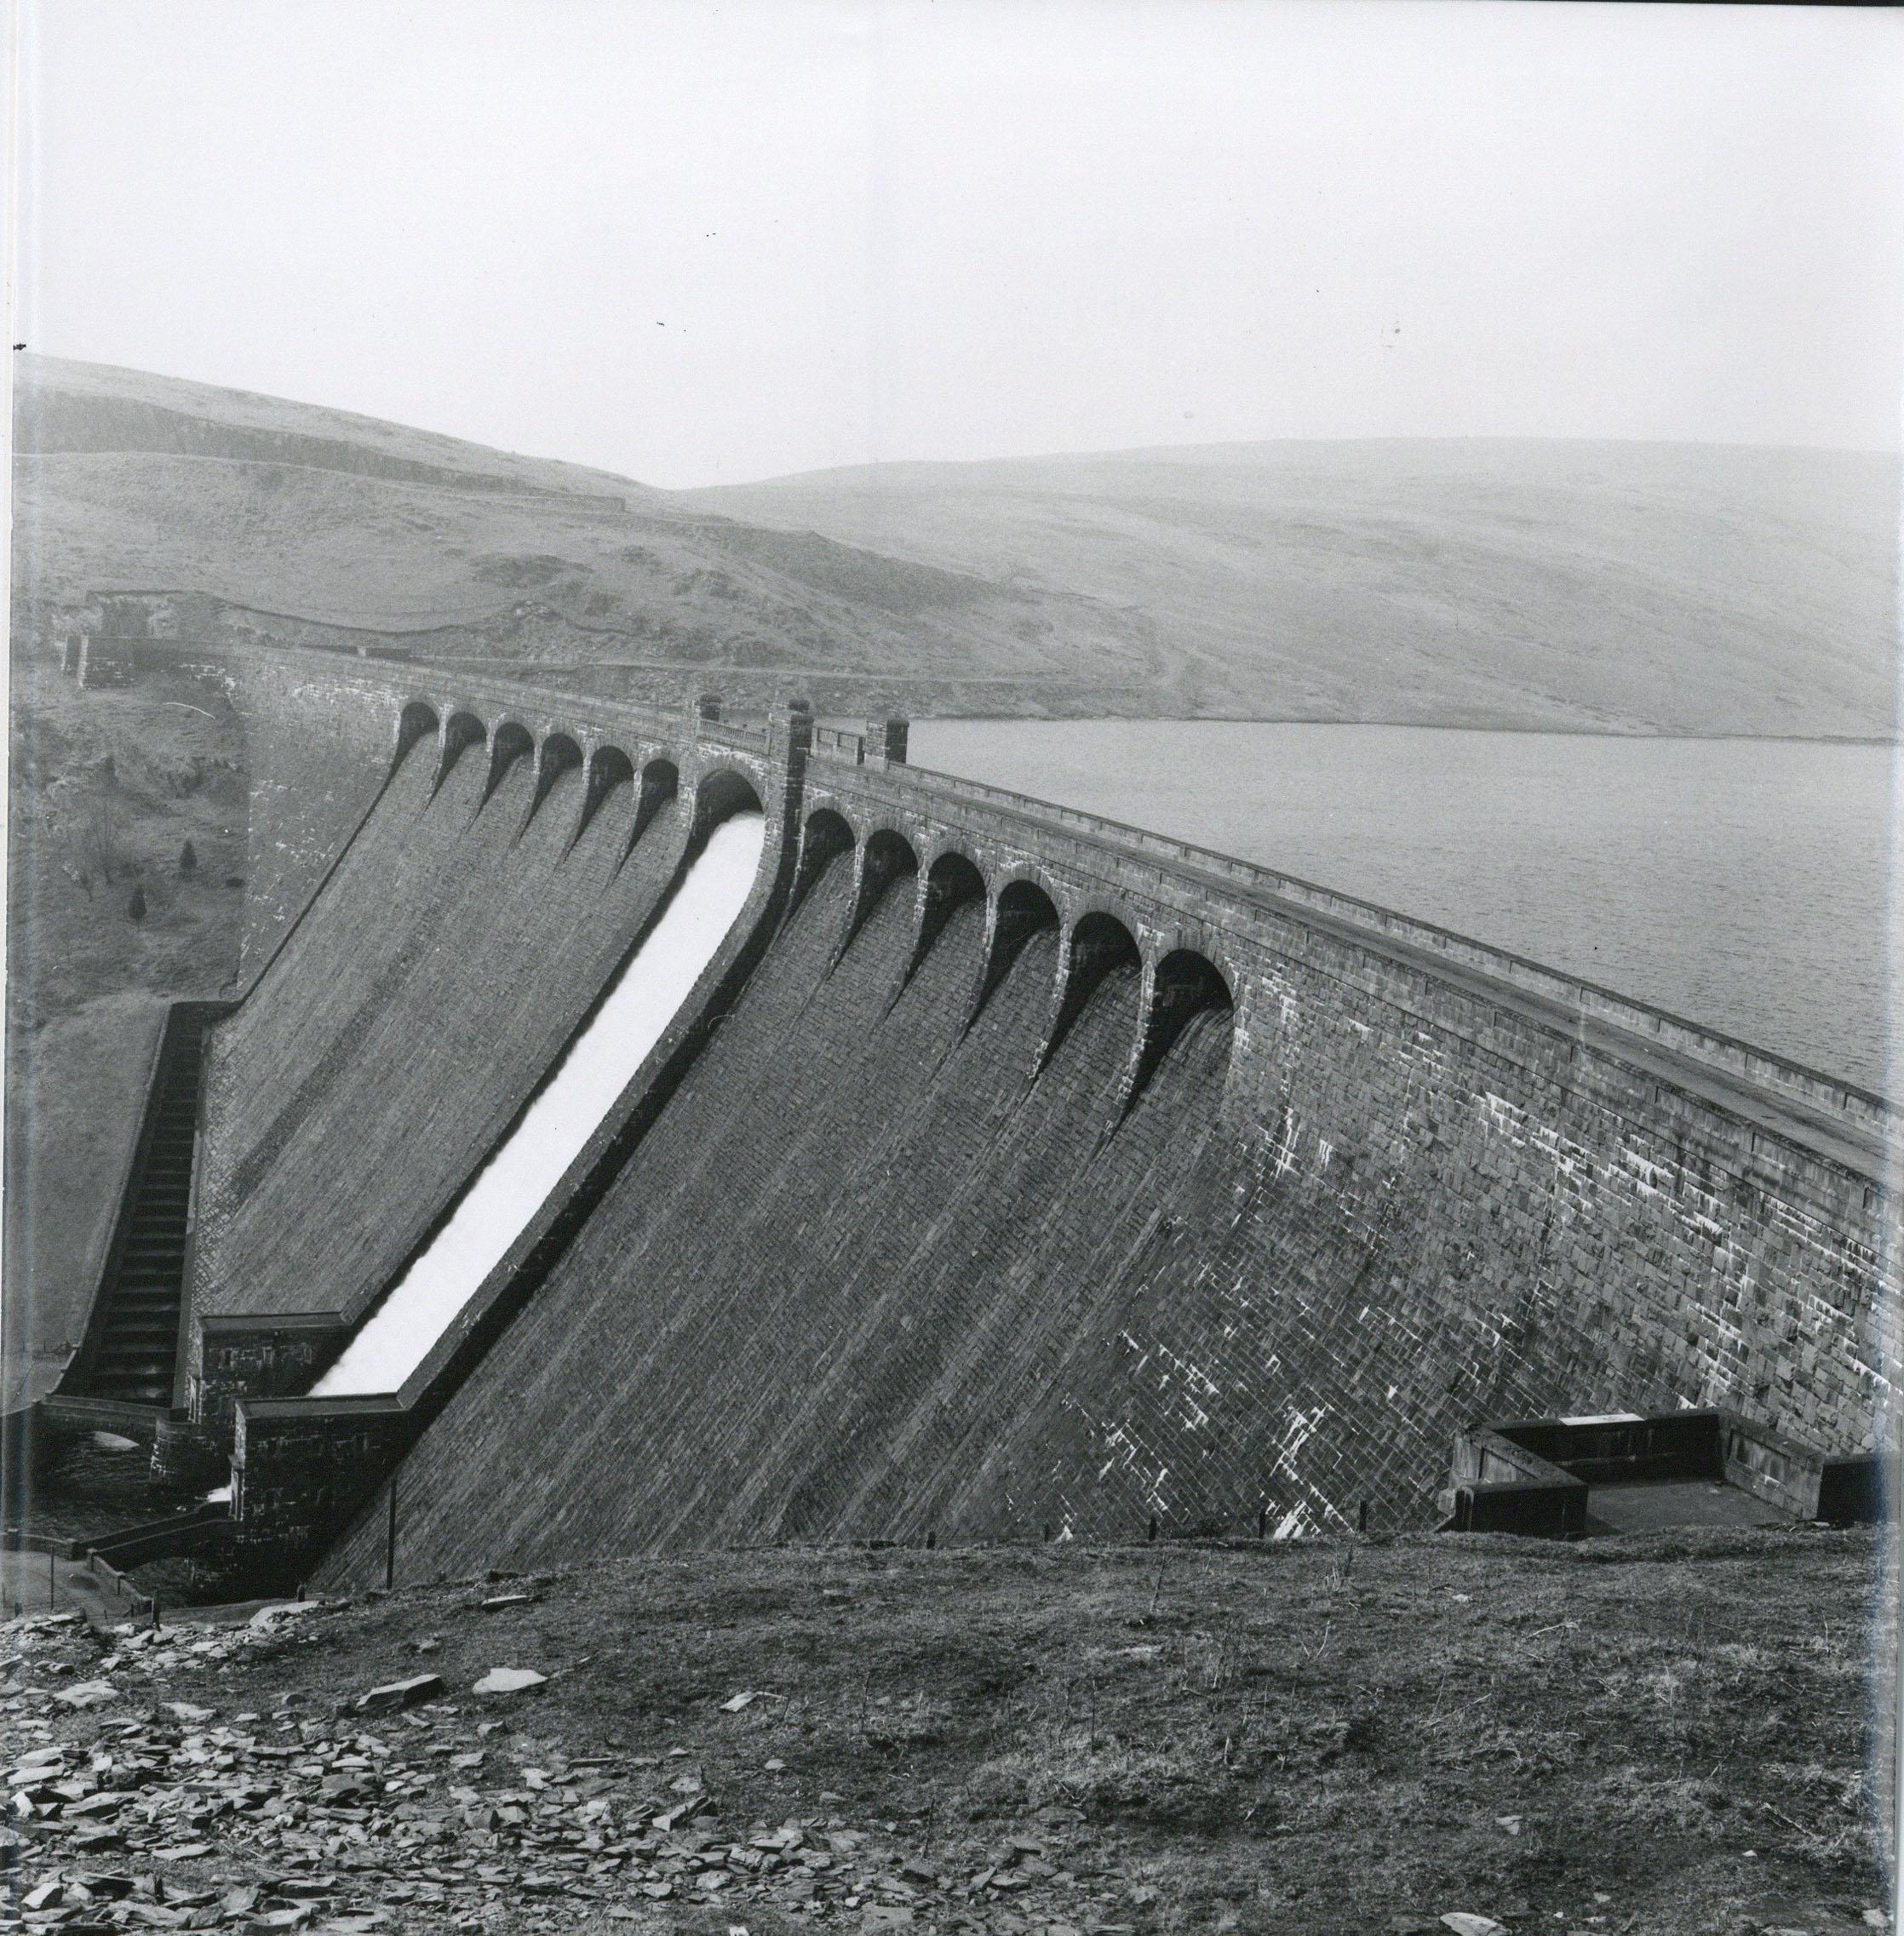 Rosemary Ellis Dam Gelatin Silver Print Photograph for the book:Pipes and Wires 